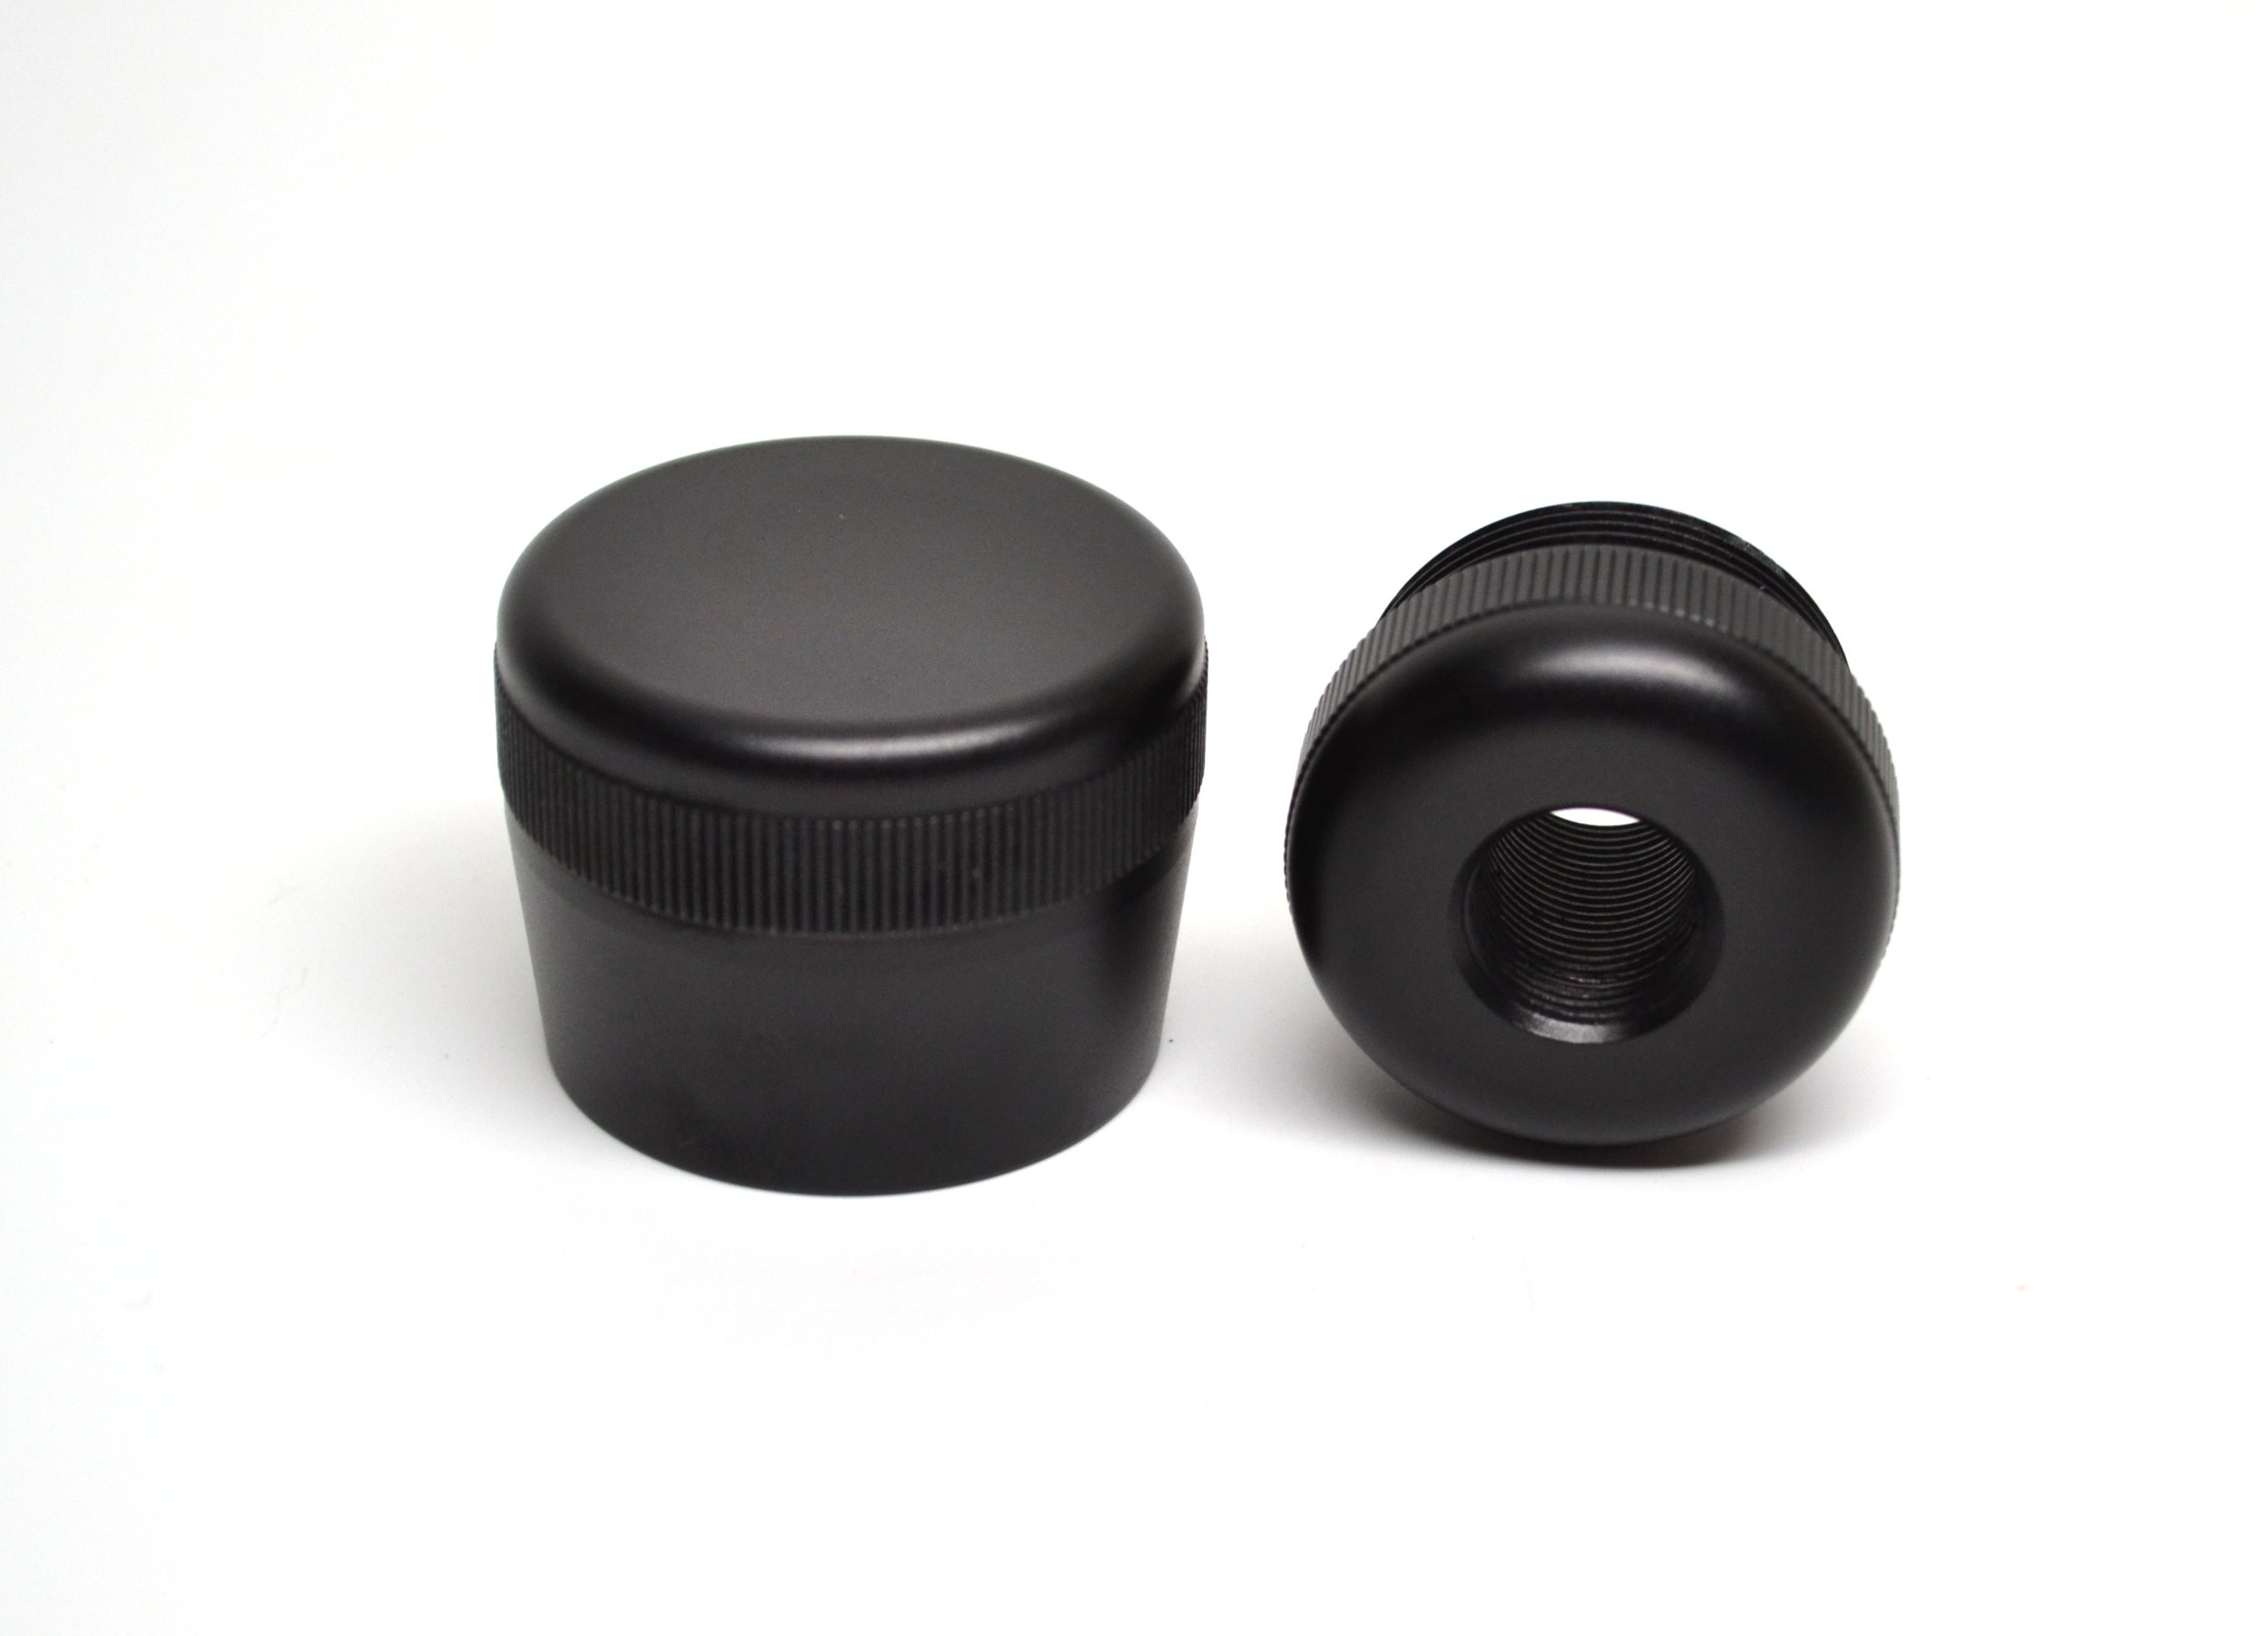 Details about   Maglite C Cell Cap Set 1/2-28 Repalcement New End Caps Adapter For Mag Lite 